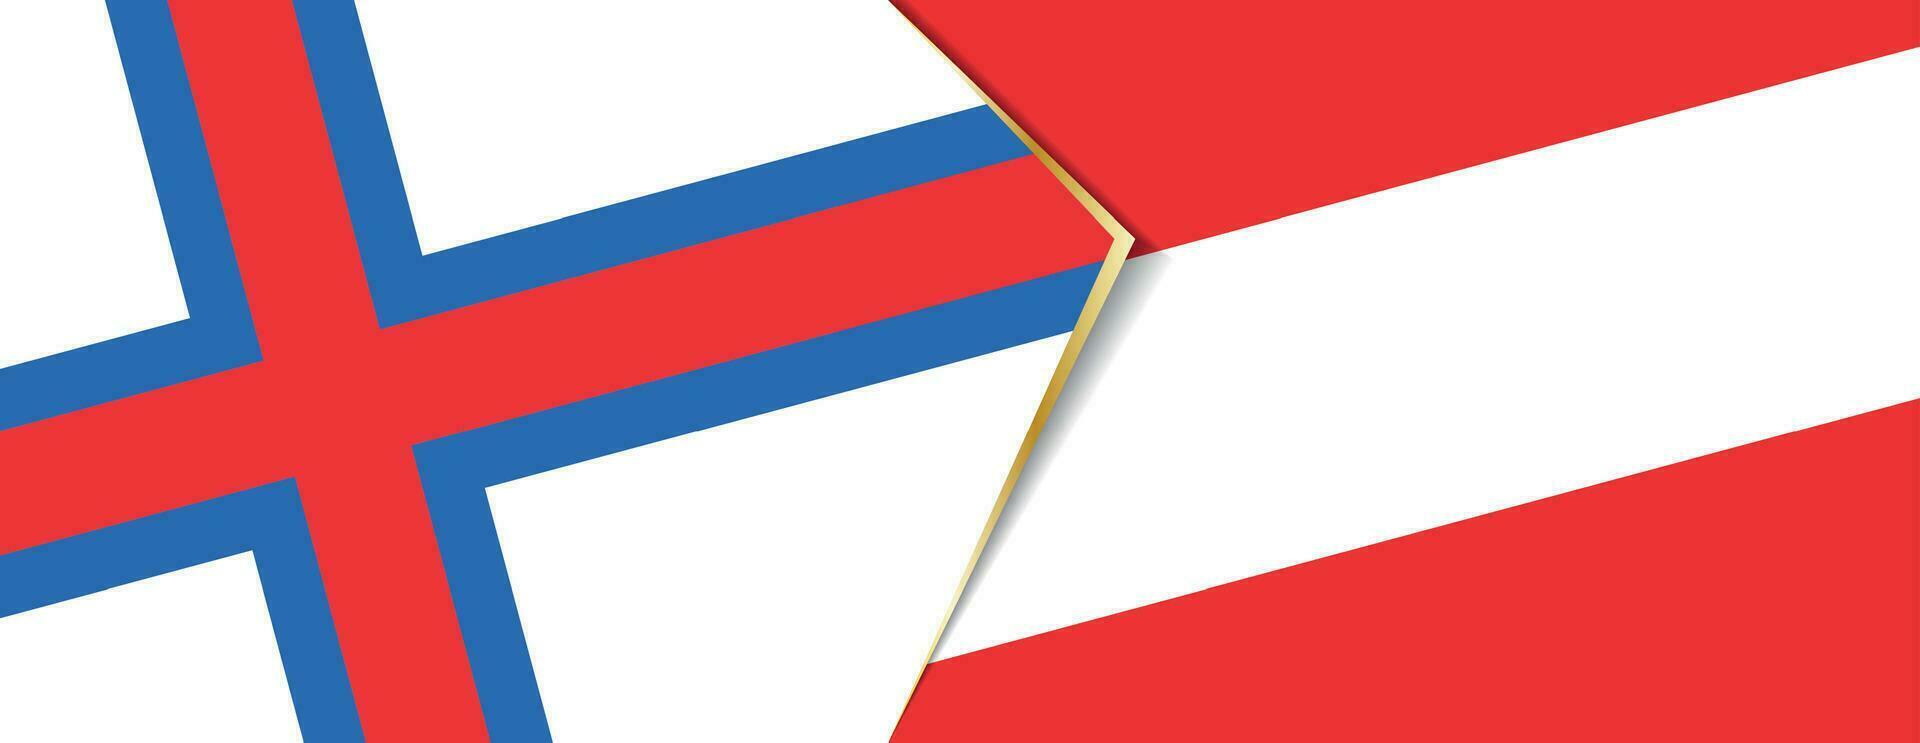 Faroe Islands and Austria flags, two vector flags.